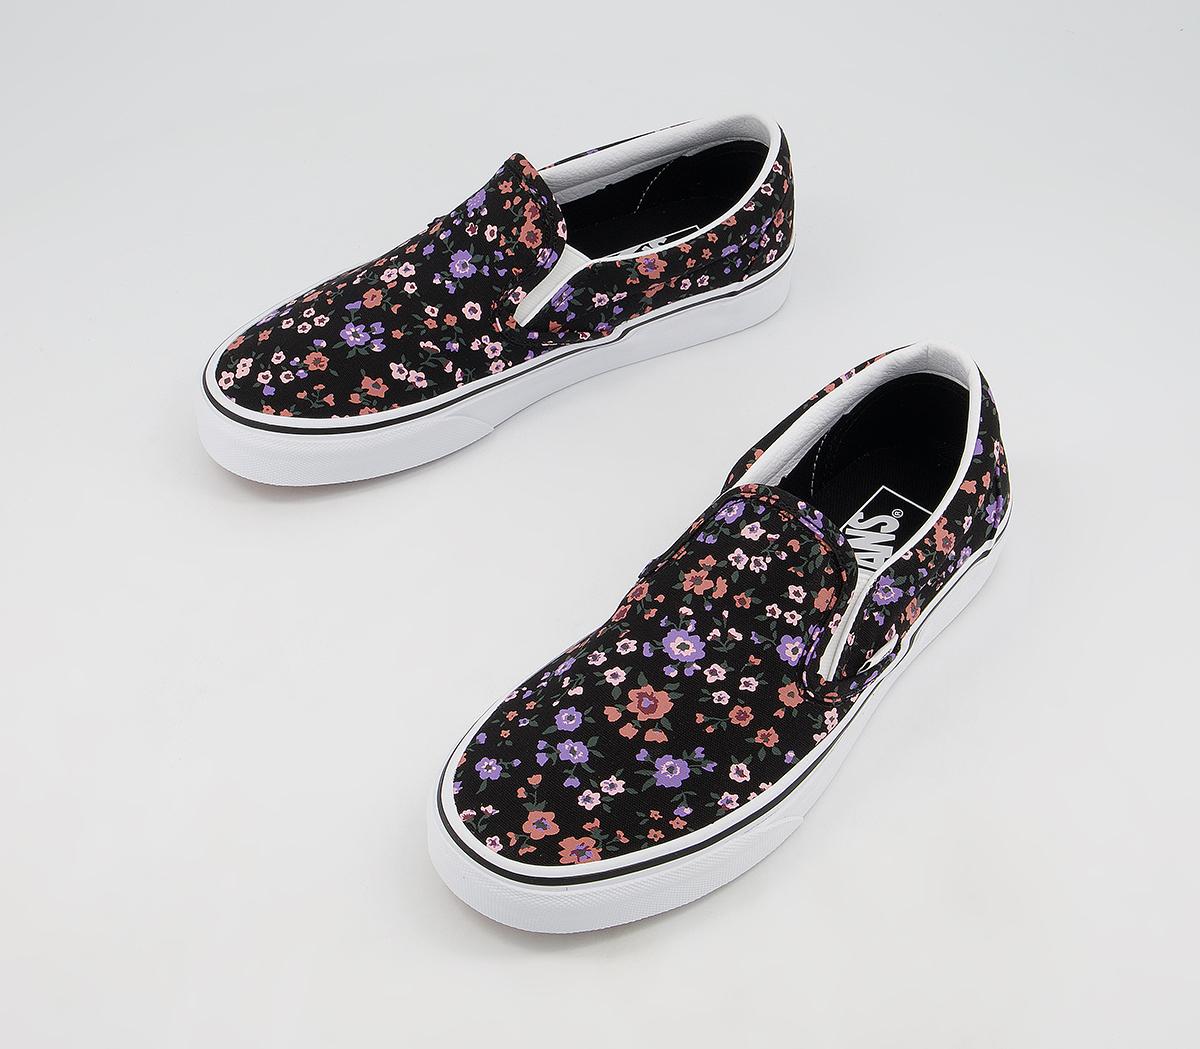 Vans Classic Slip On Trainers Floral Ditsy True White - Hers trainers